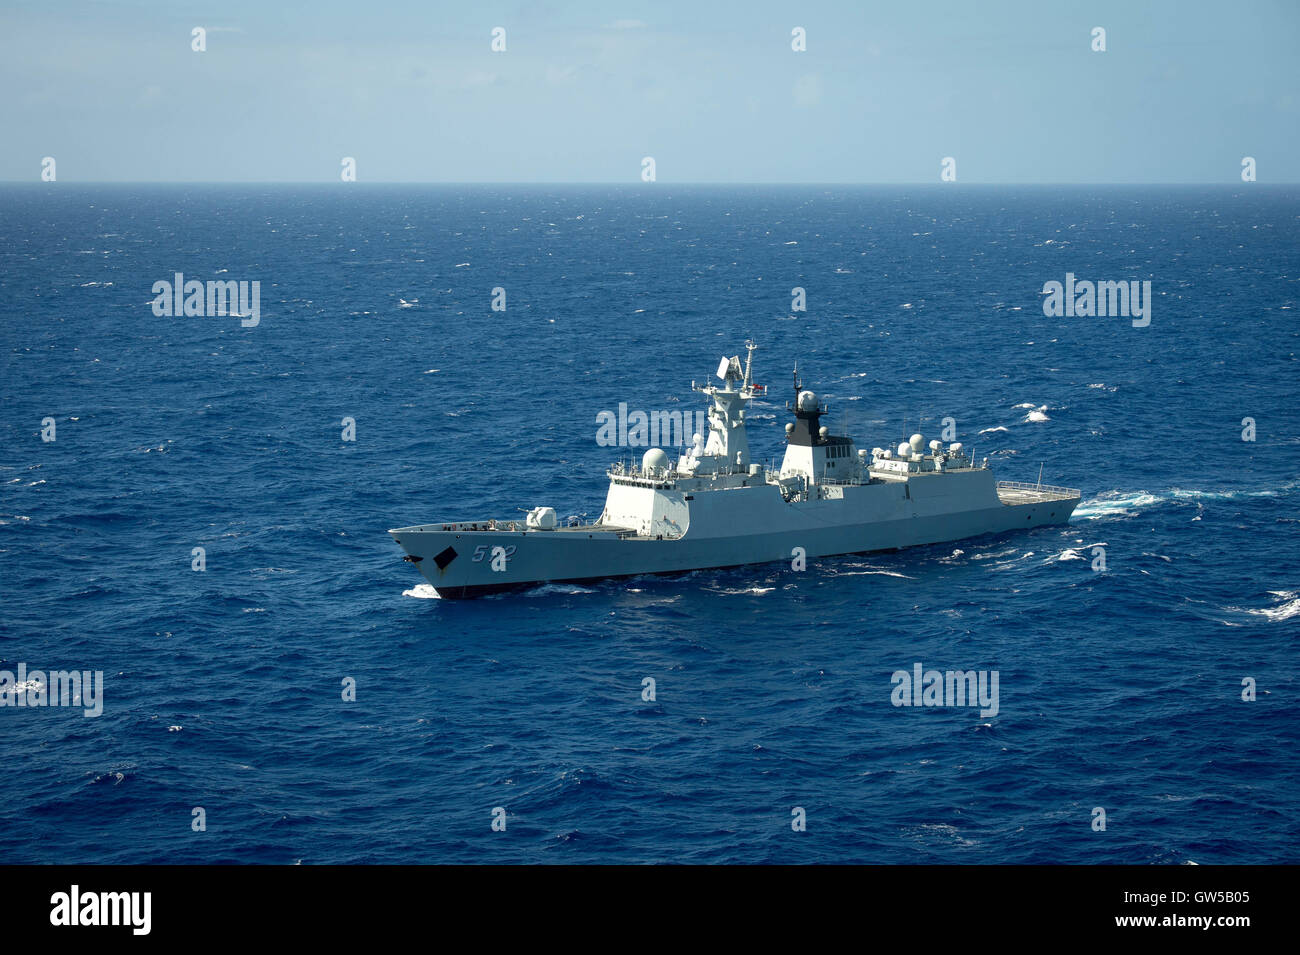 Chinese Navy multi-role frigate Hengshui steams in close formation during the Rim of the Pacific exercise June 22, 2016 in the Pacific Ocean. Twenty-six nations, more than 40 ships and submarines, more than 200 aircraft and 25,000 personnel are participating in RIMPAC. Stock Photo